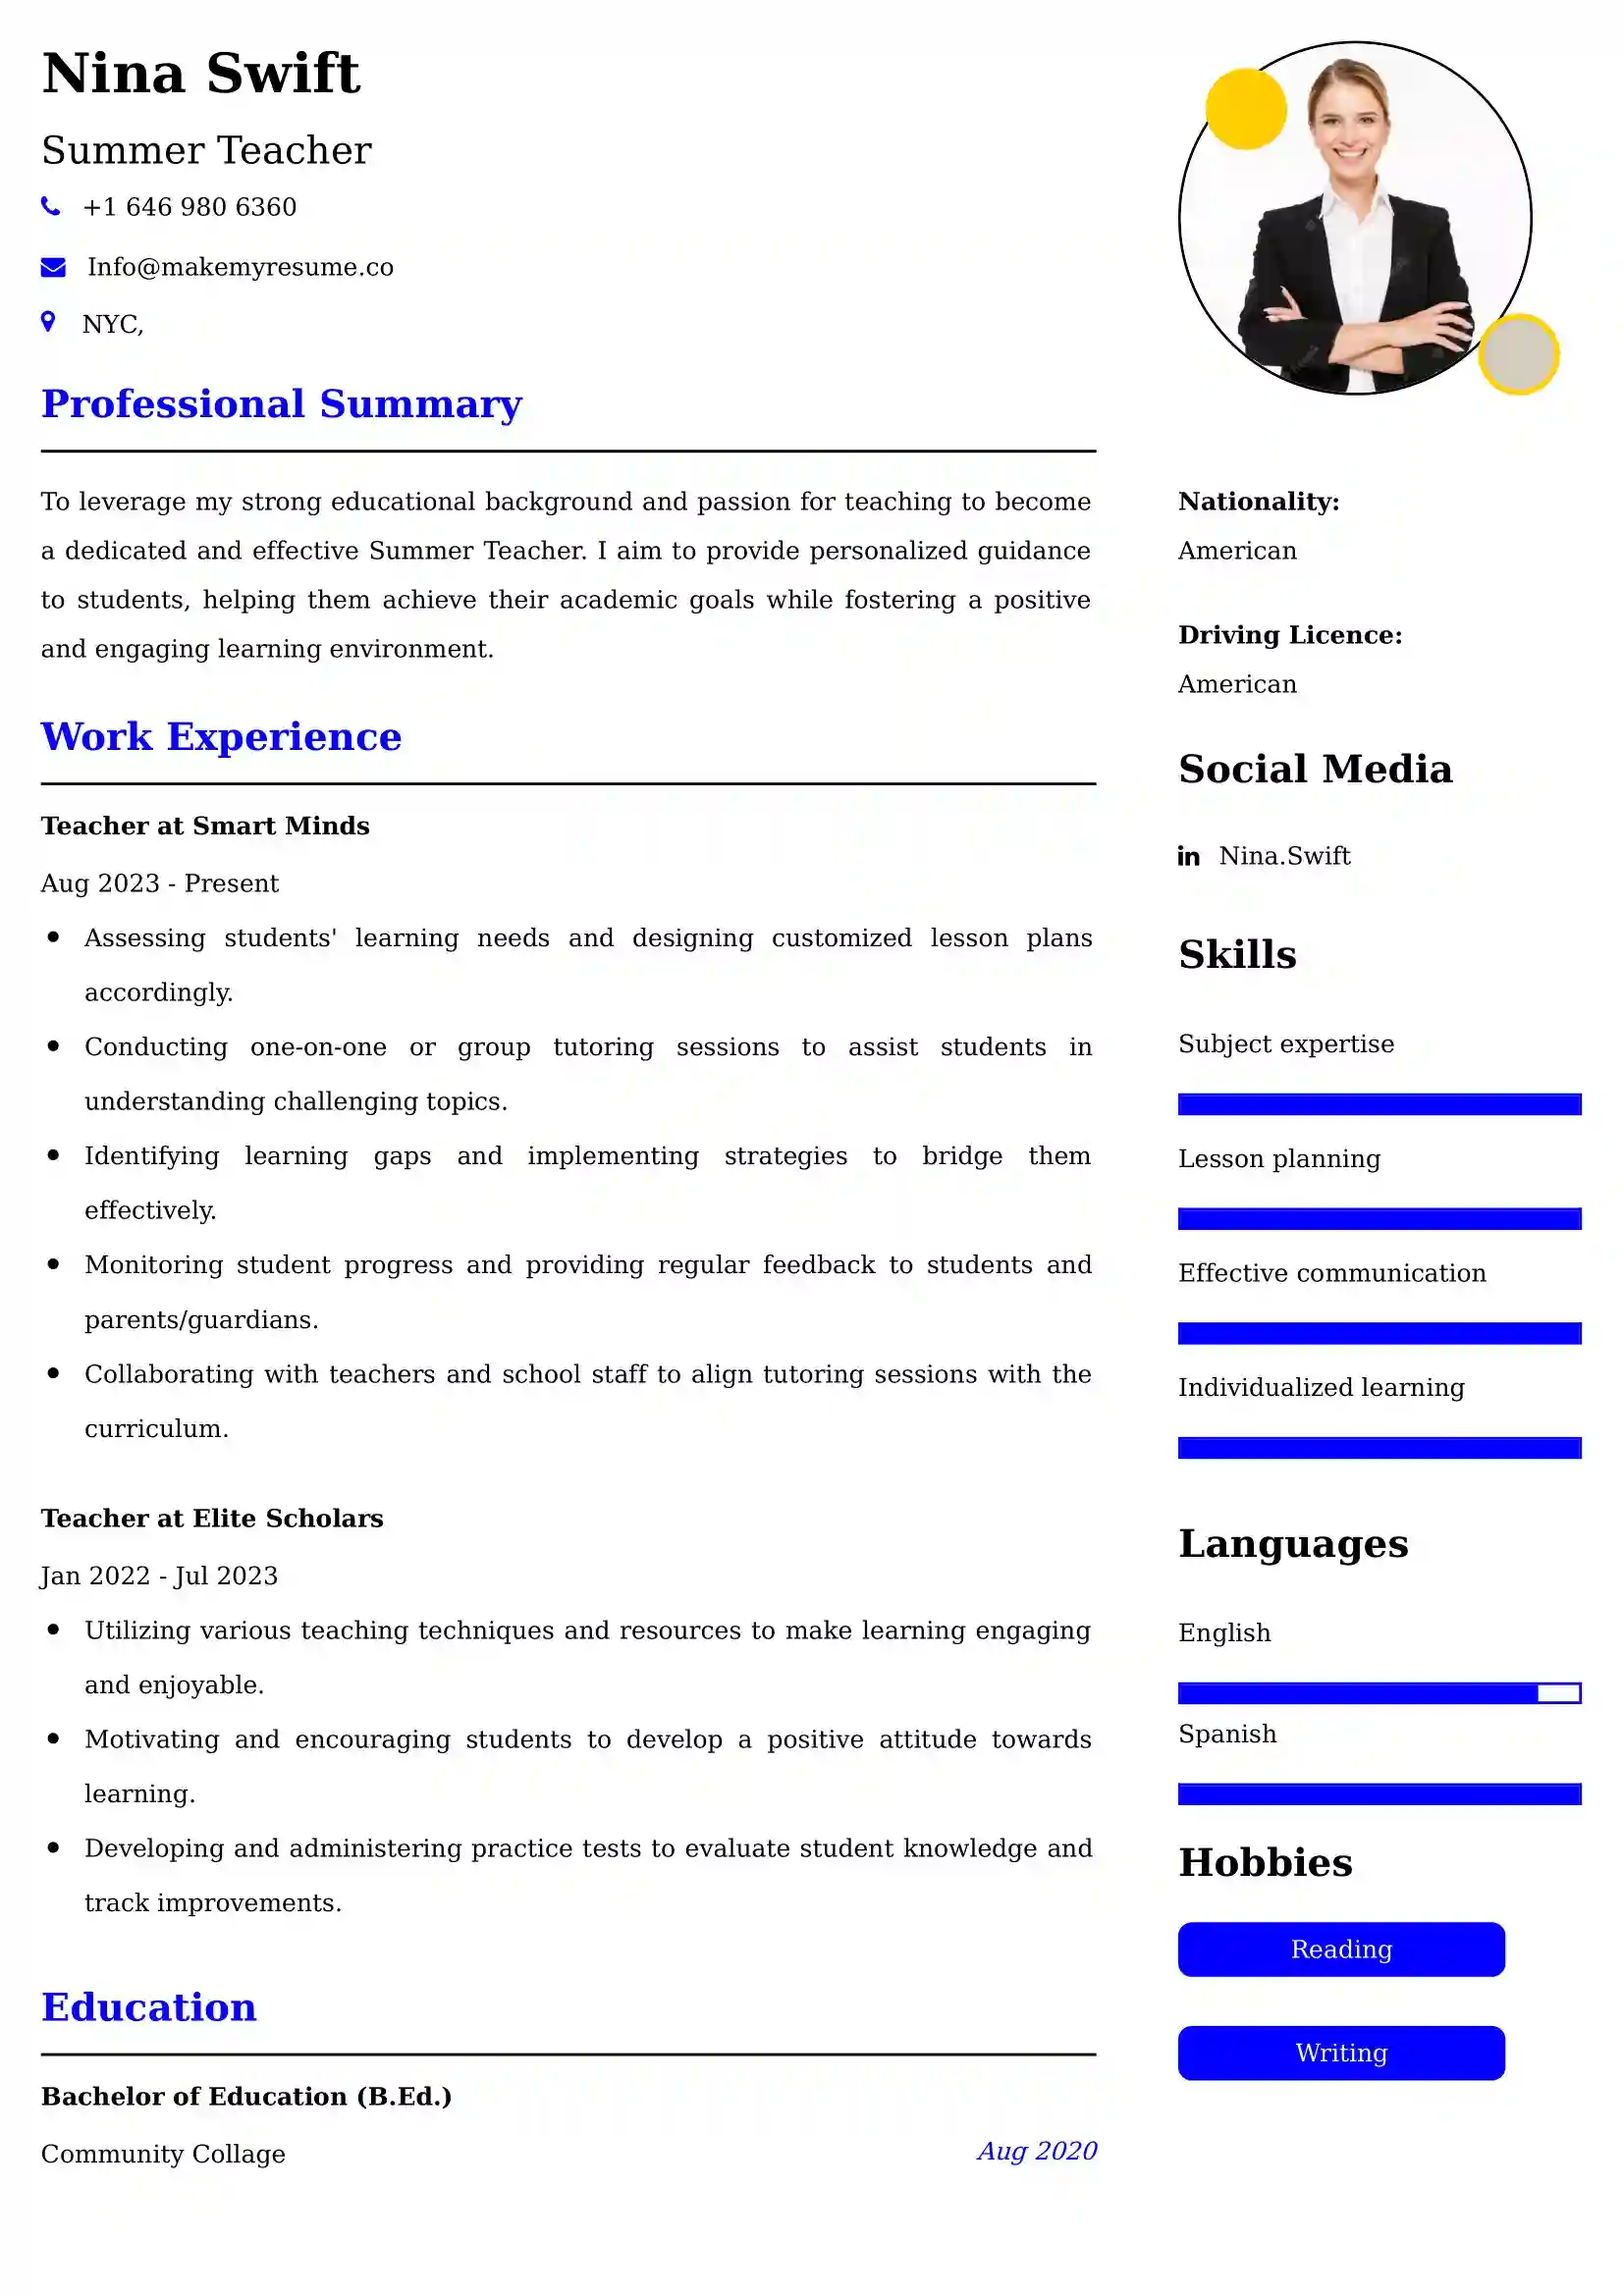 Summer Teacher Resume Examples - UAE Format and Tips.